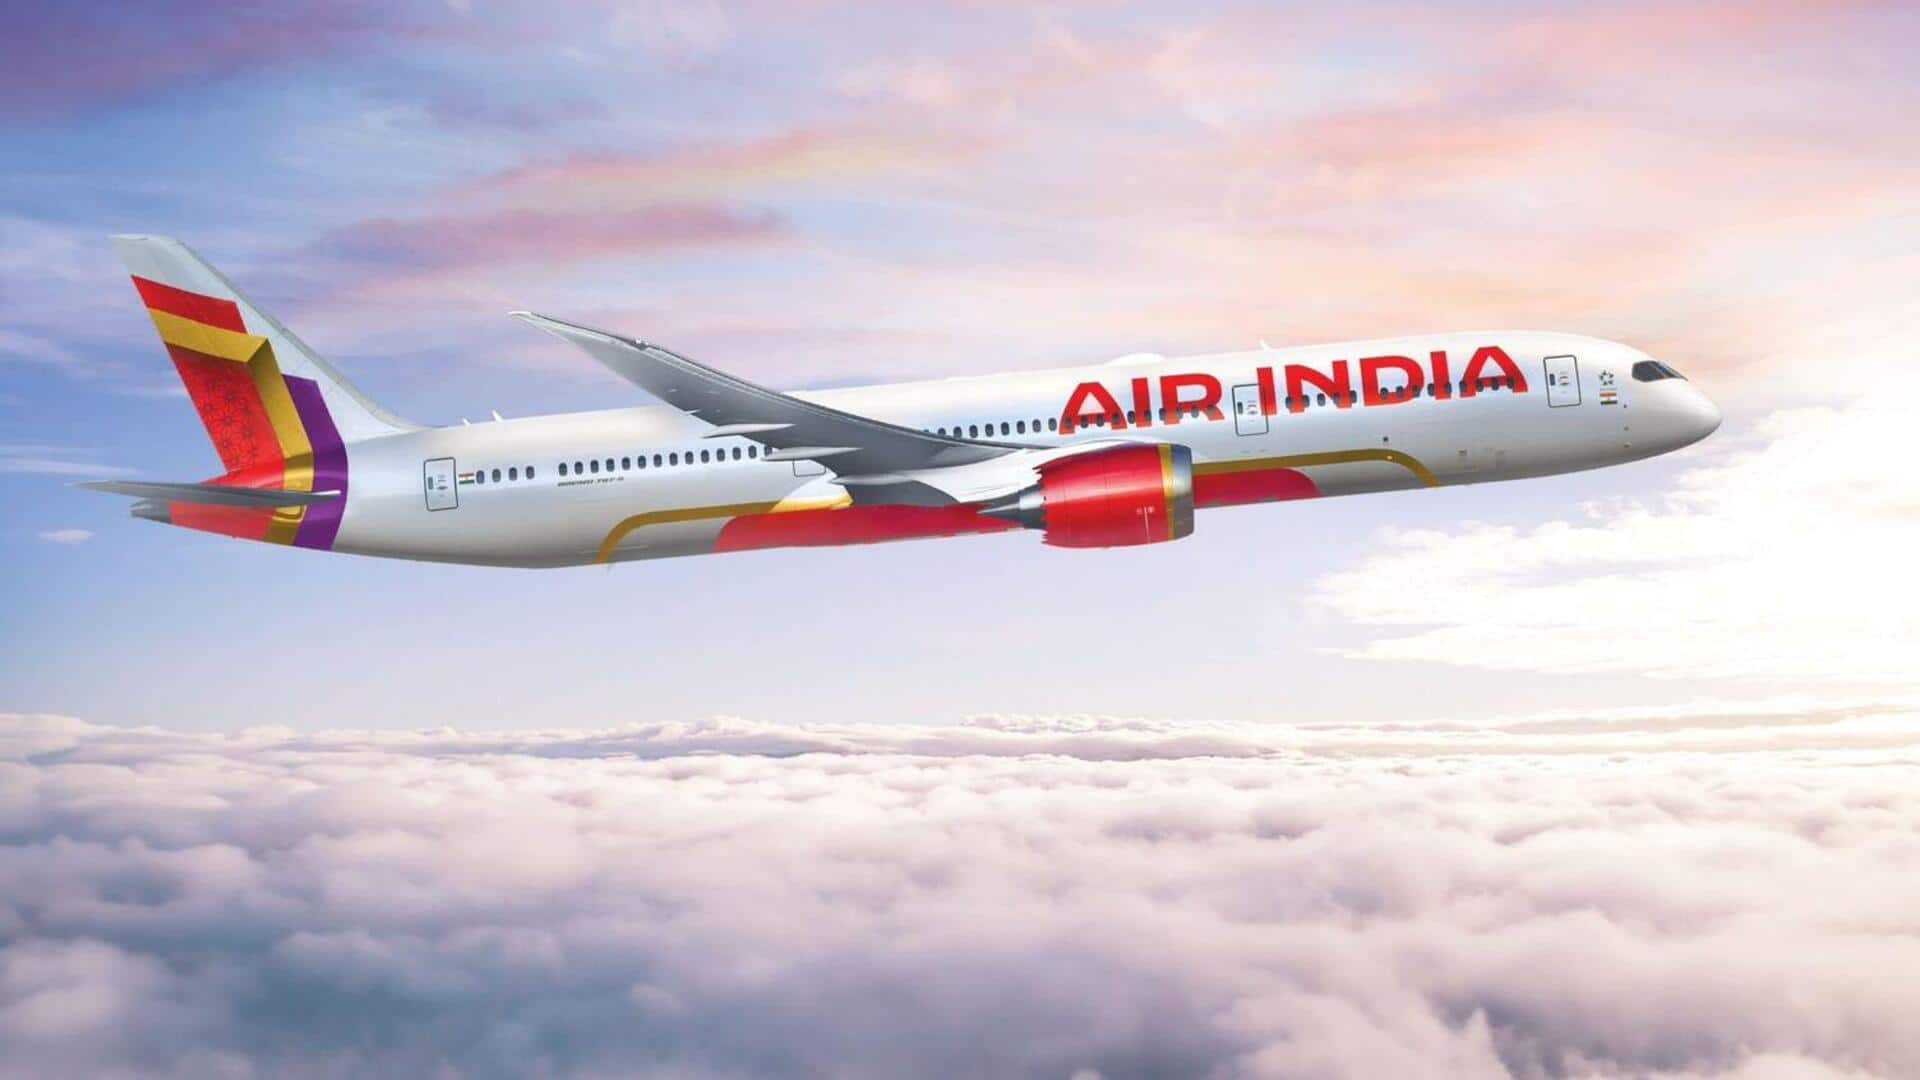 DGCA fines Air India for non-compliance with CAR regulations